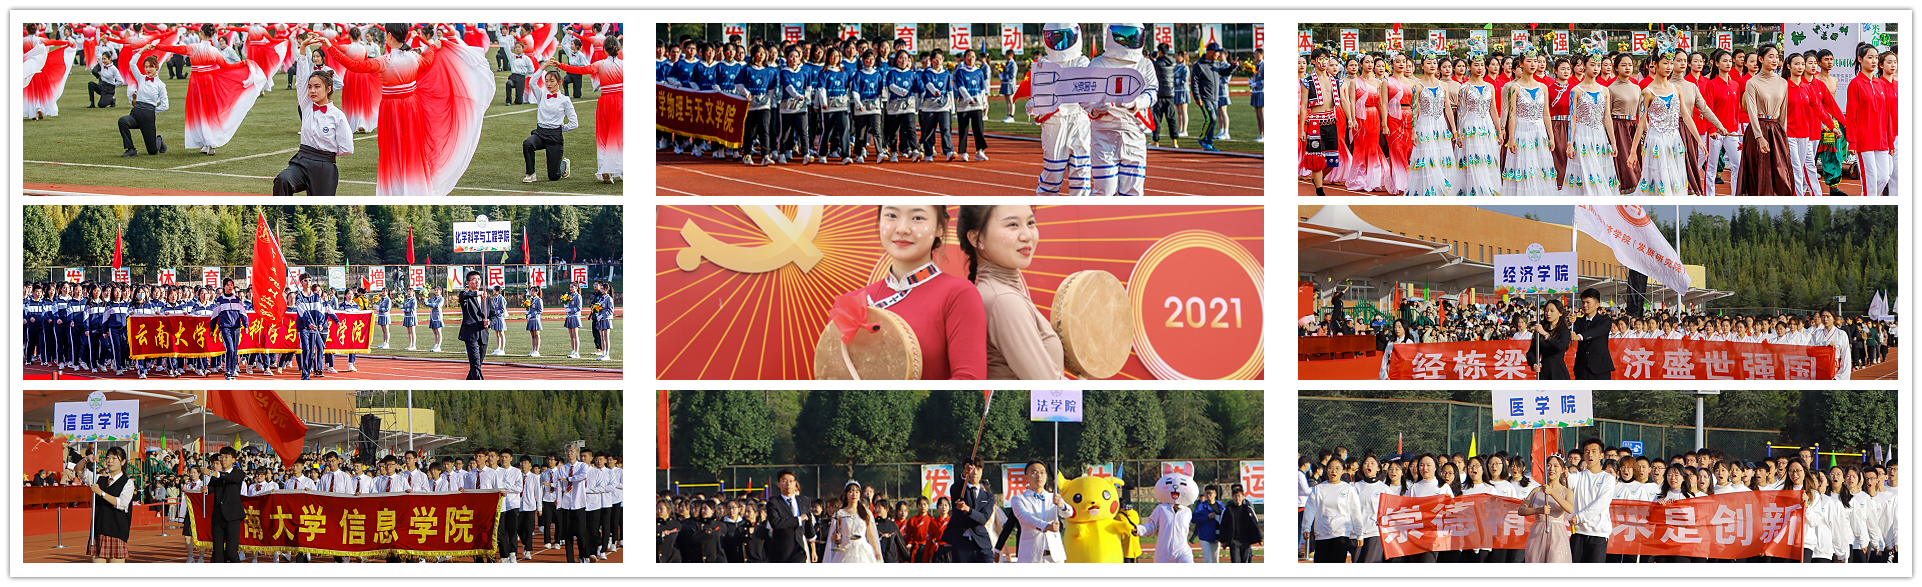 Annual sports and culture festival opens at Yunnan University